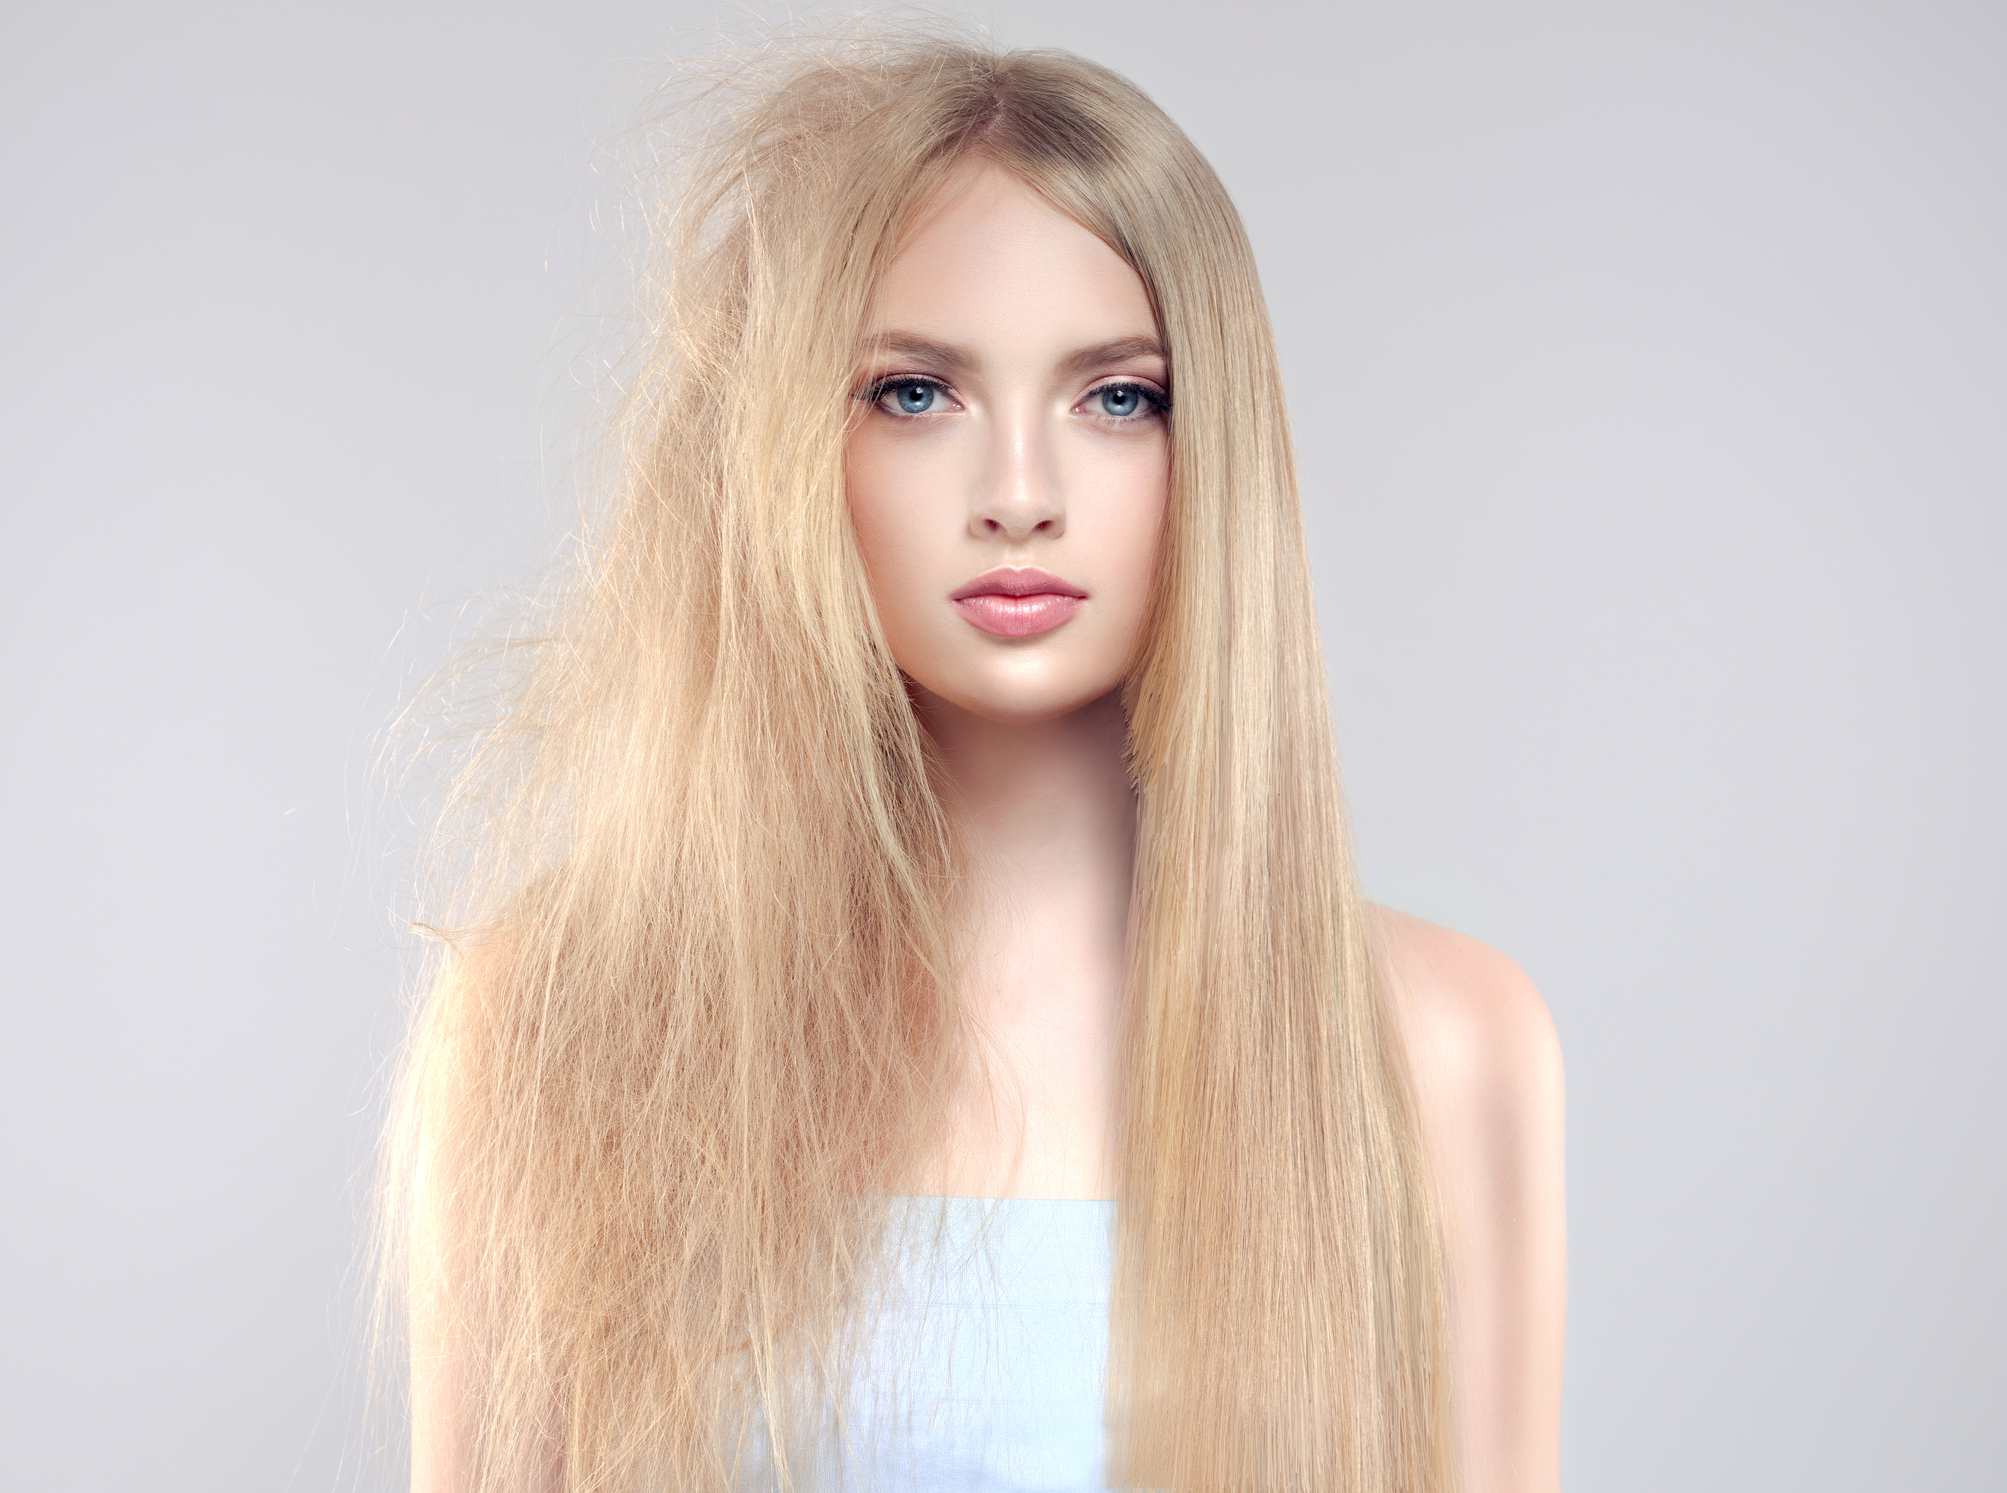 Caucasian woman with long blonde hair looks at camera, and has frizzy, damaged hair on one side of hair and smooth, sleek hair on the other side of her hair.